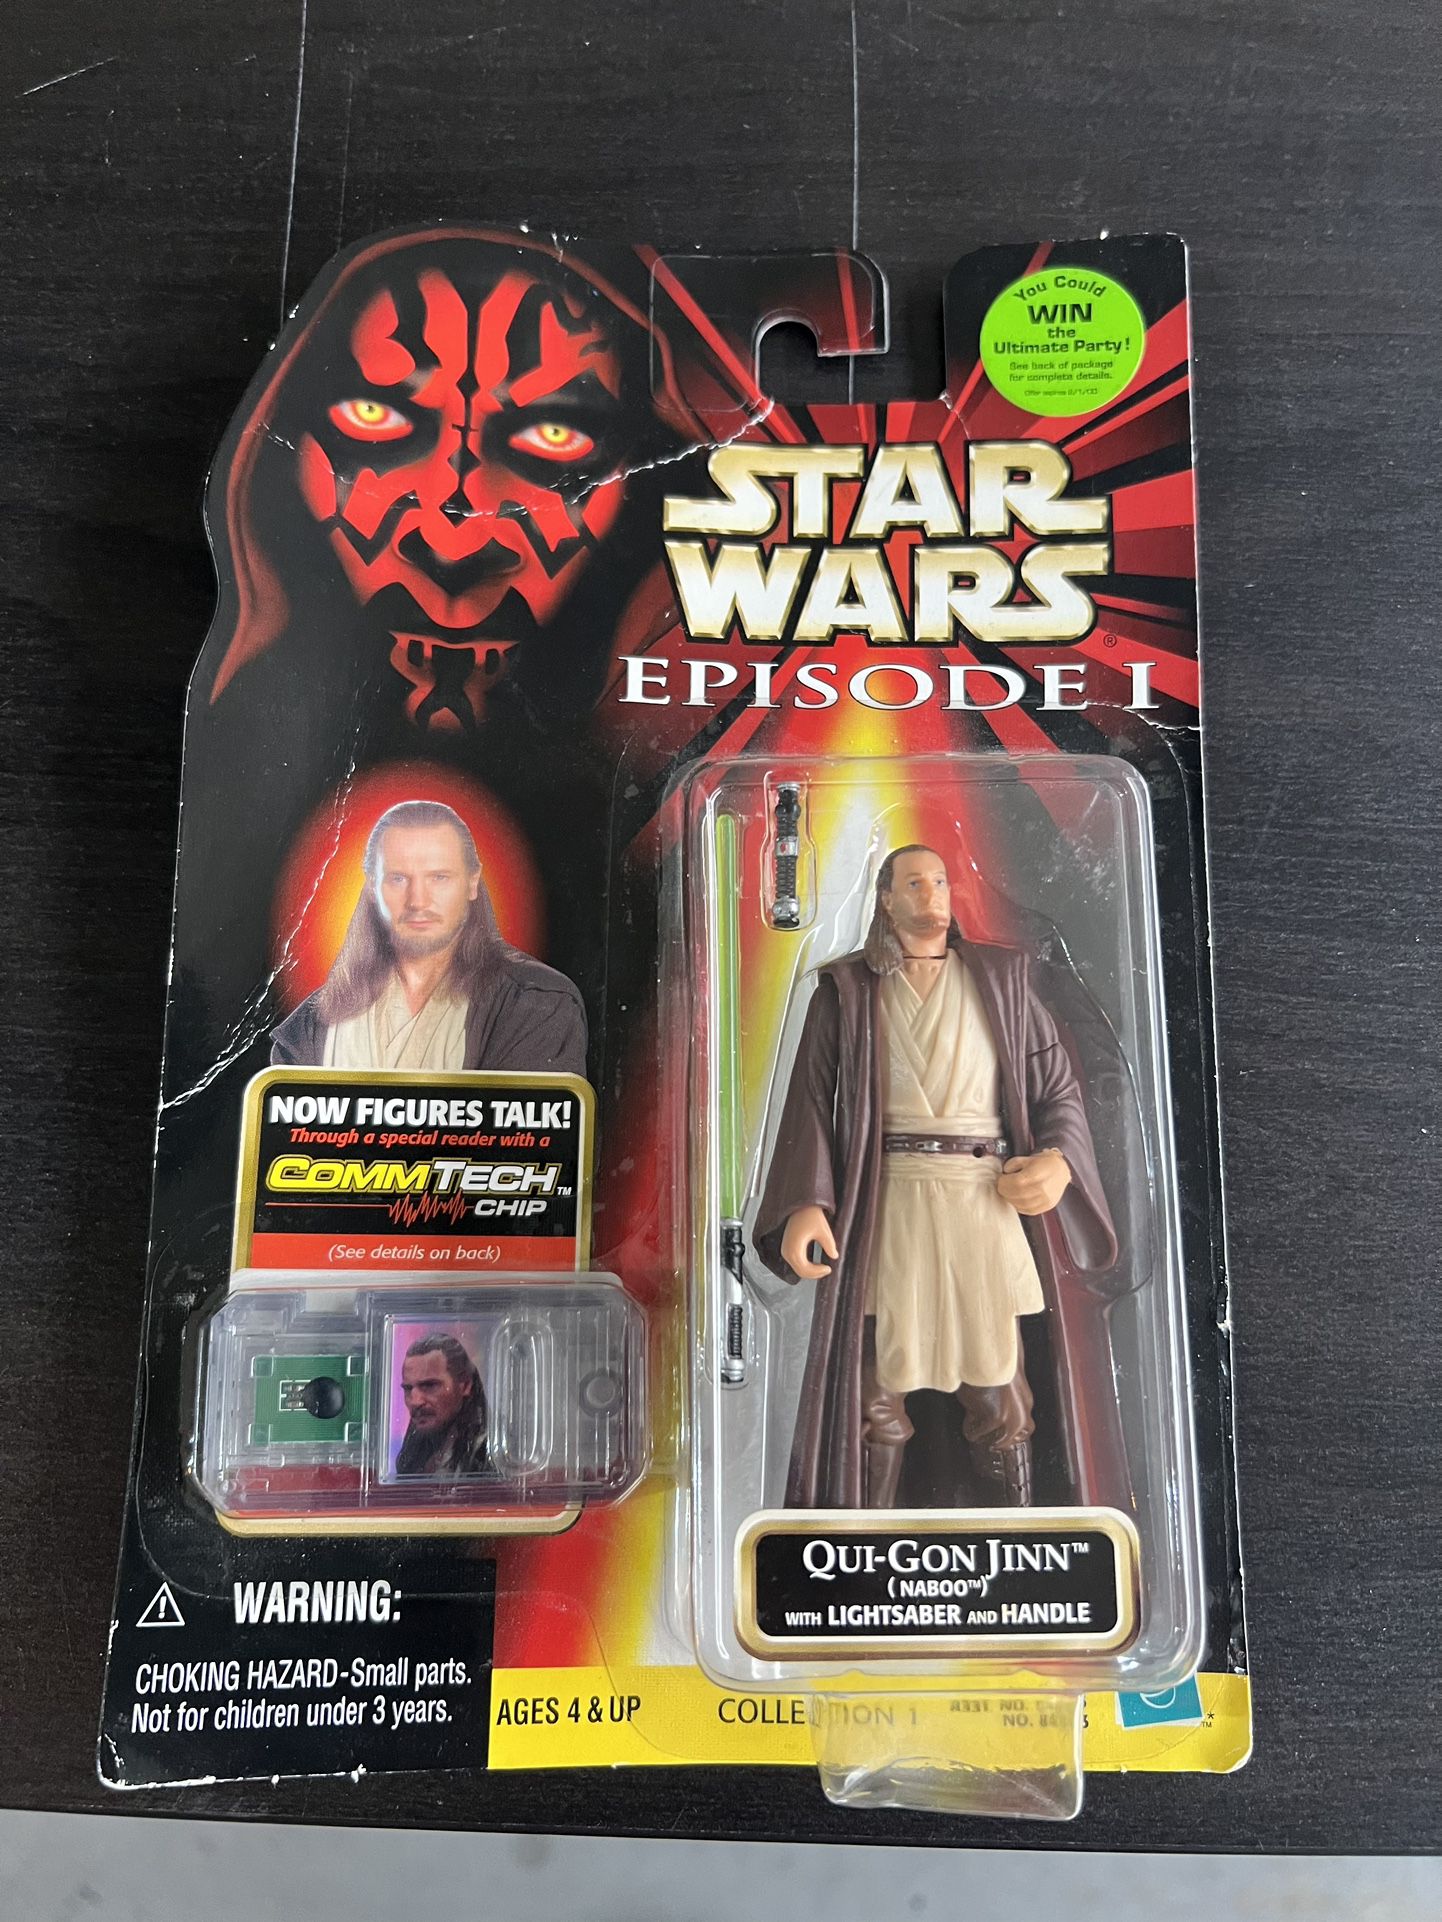 Star Wars Action Figure Toy